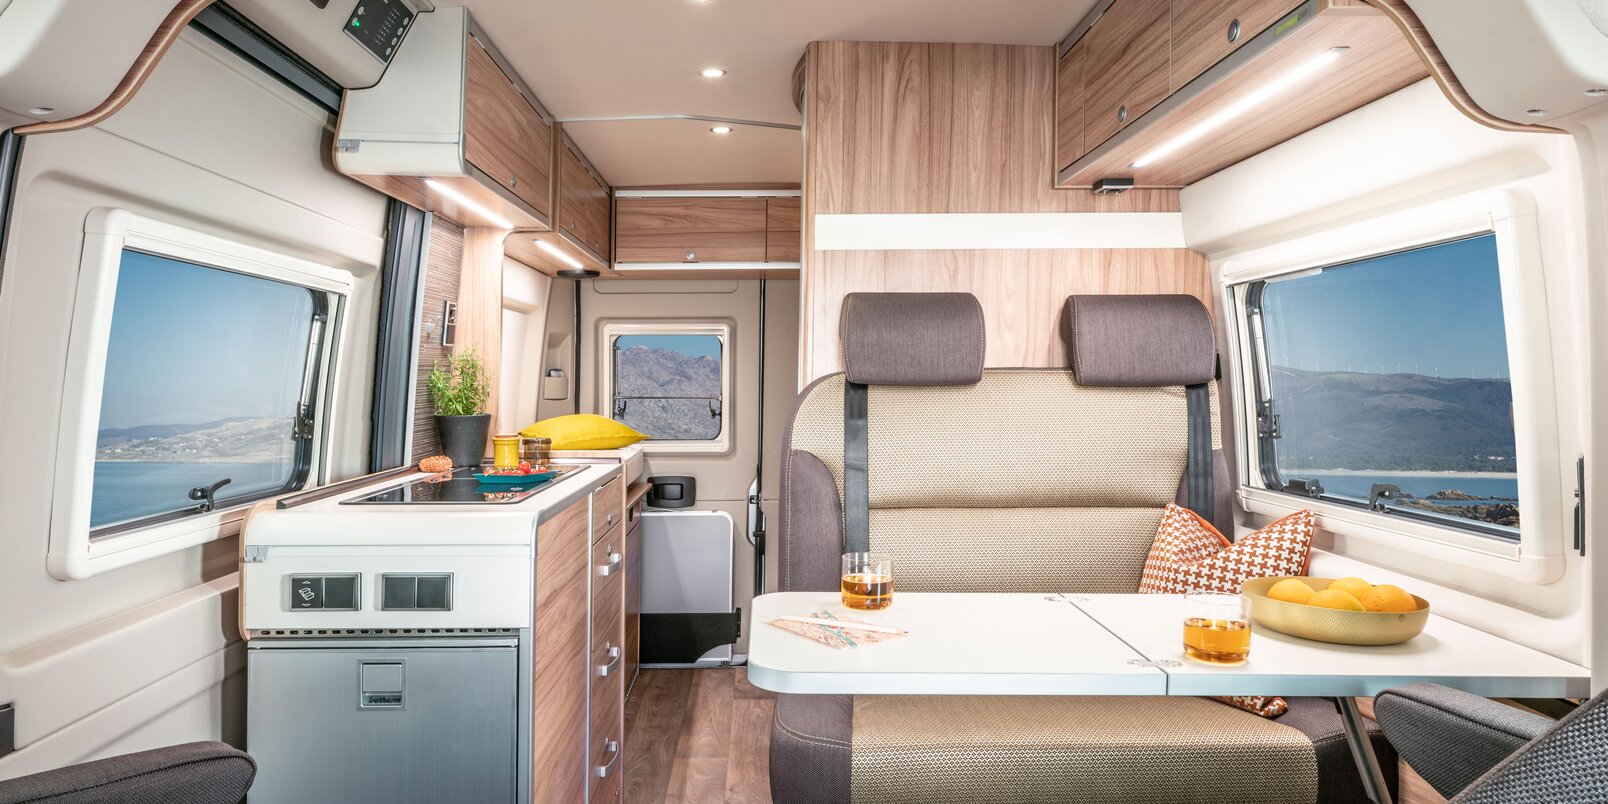 HYMER Camper Van living space: driver's seats, table, bench, kitchen, side wall windows, overhead storage cupboards, rear door with window